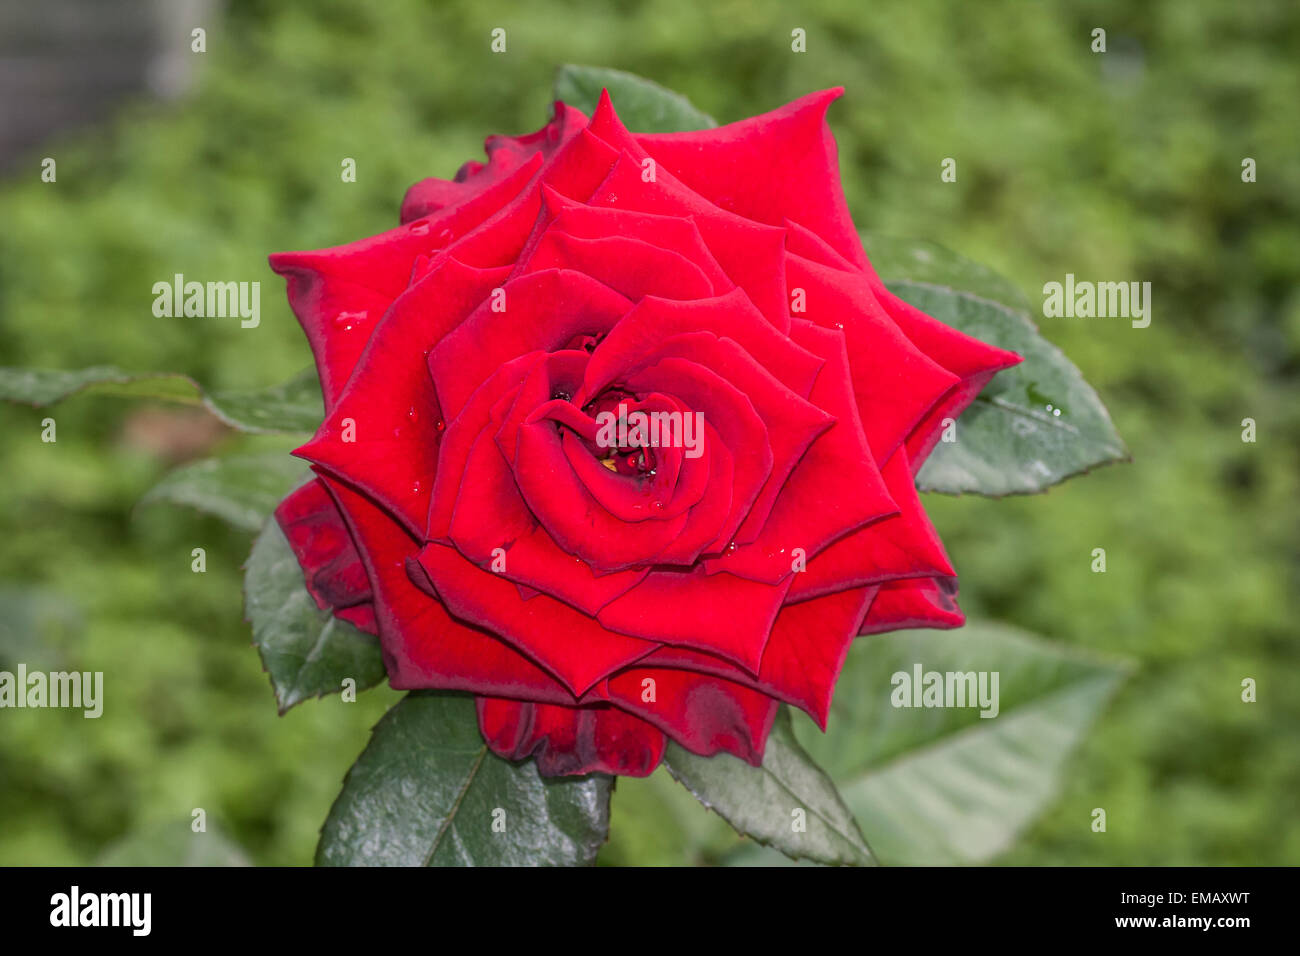 Red Rose on the Branch in Garden Stock Photo